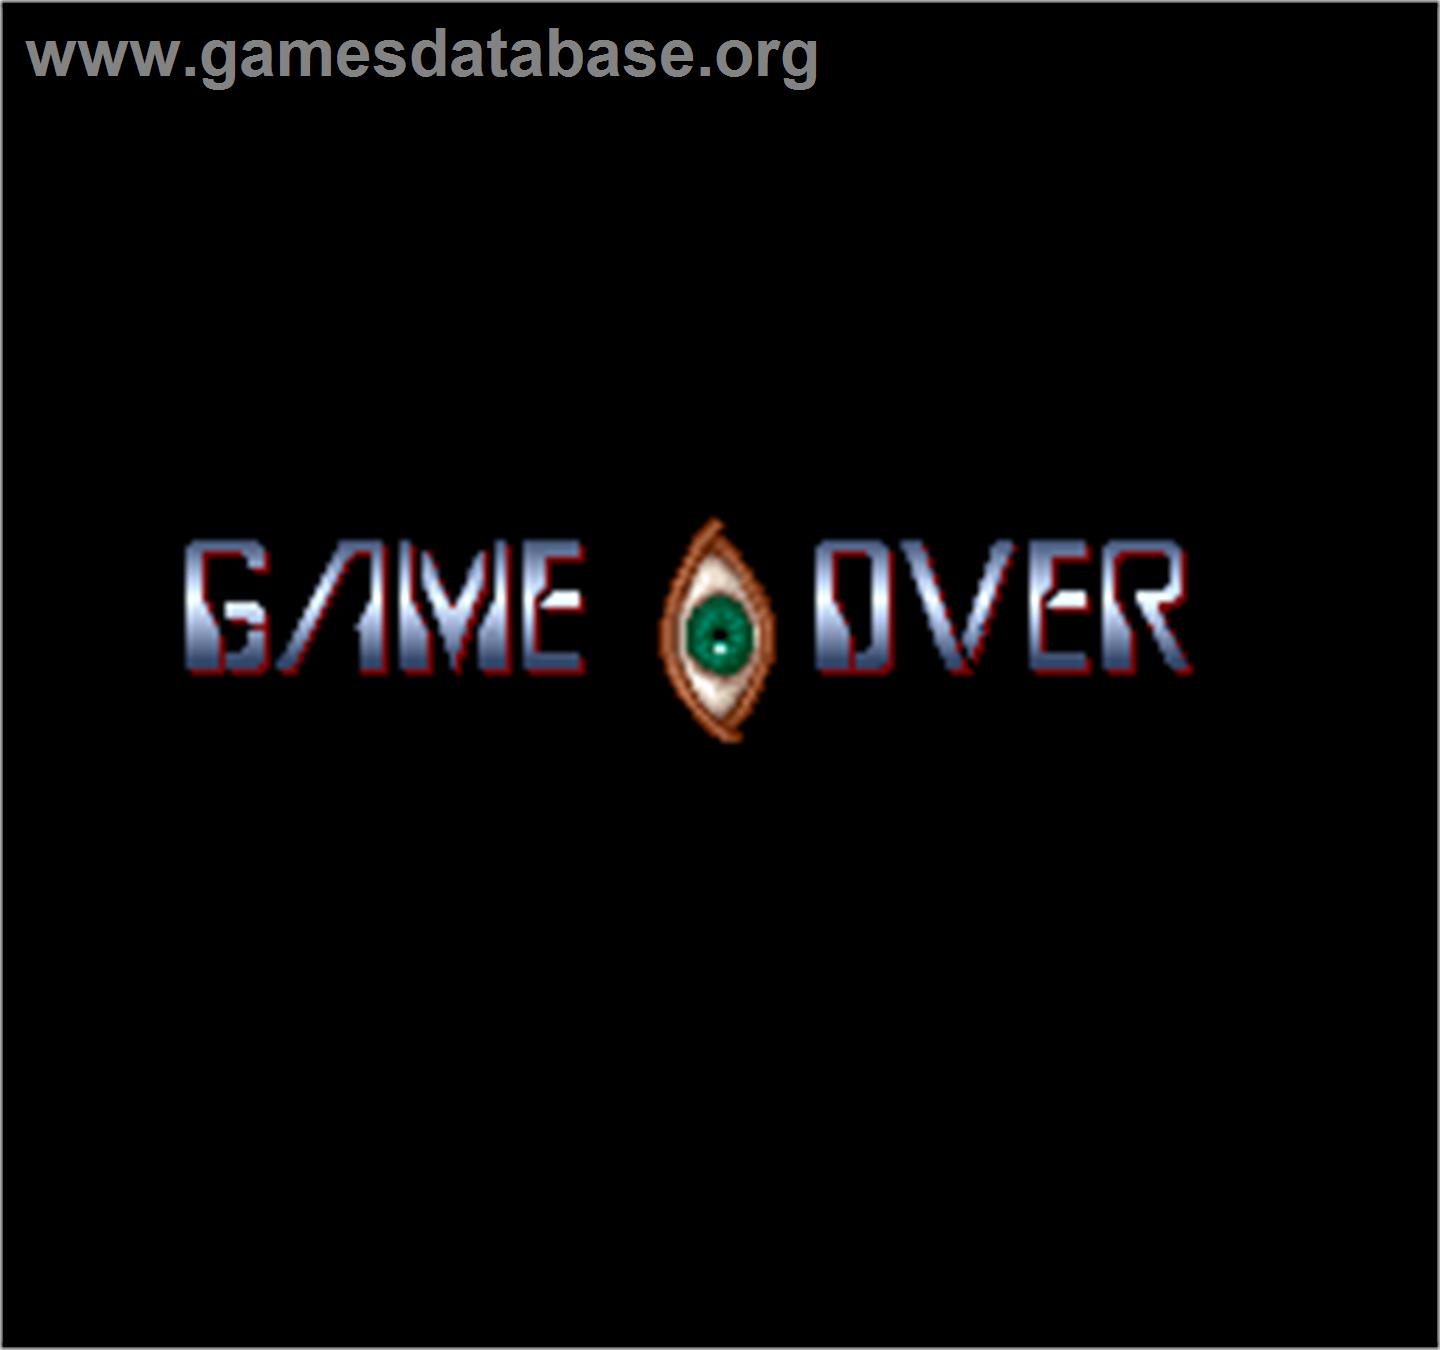 Act-Fancer Cybernetick Hyper Weapon - Arcade - Artwork - Game Over Screen